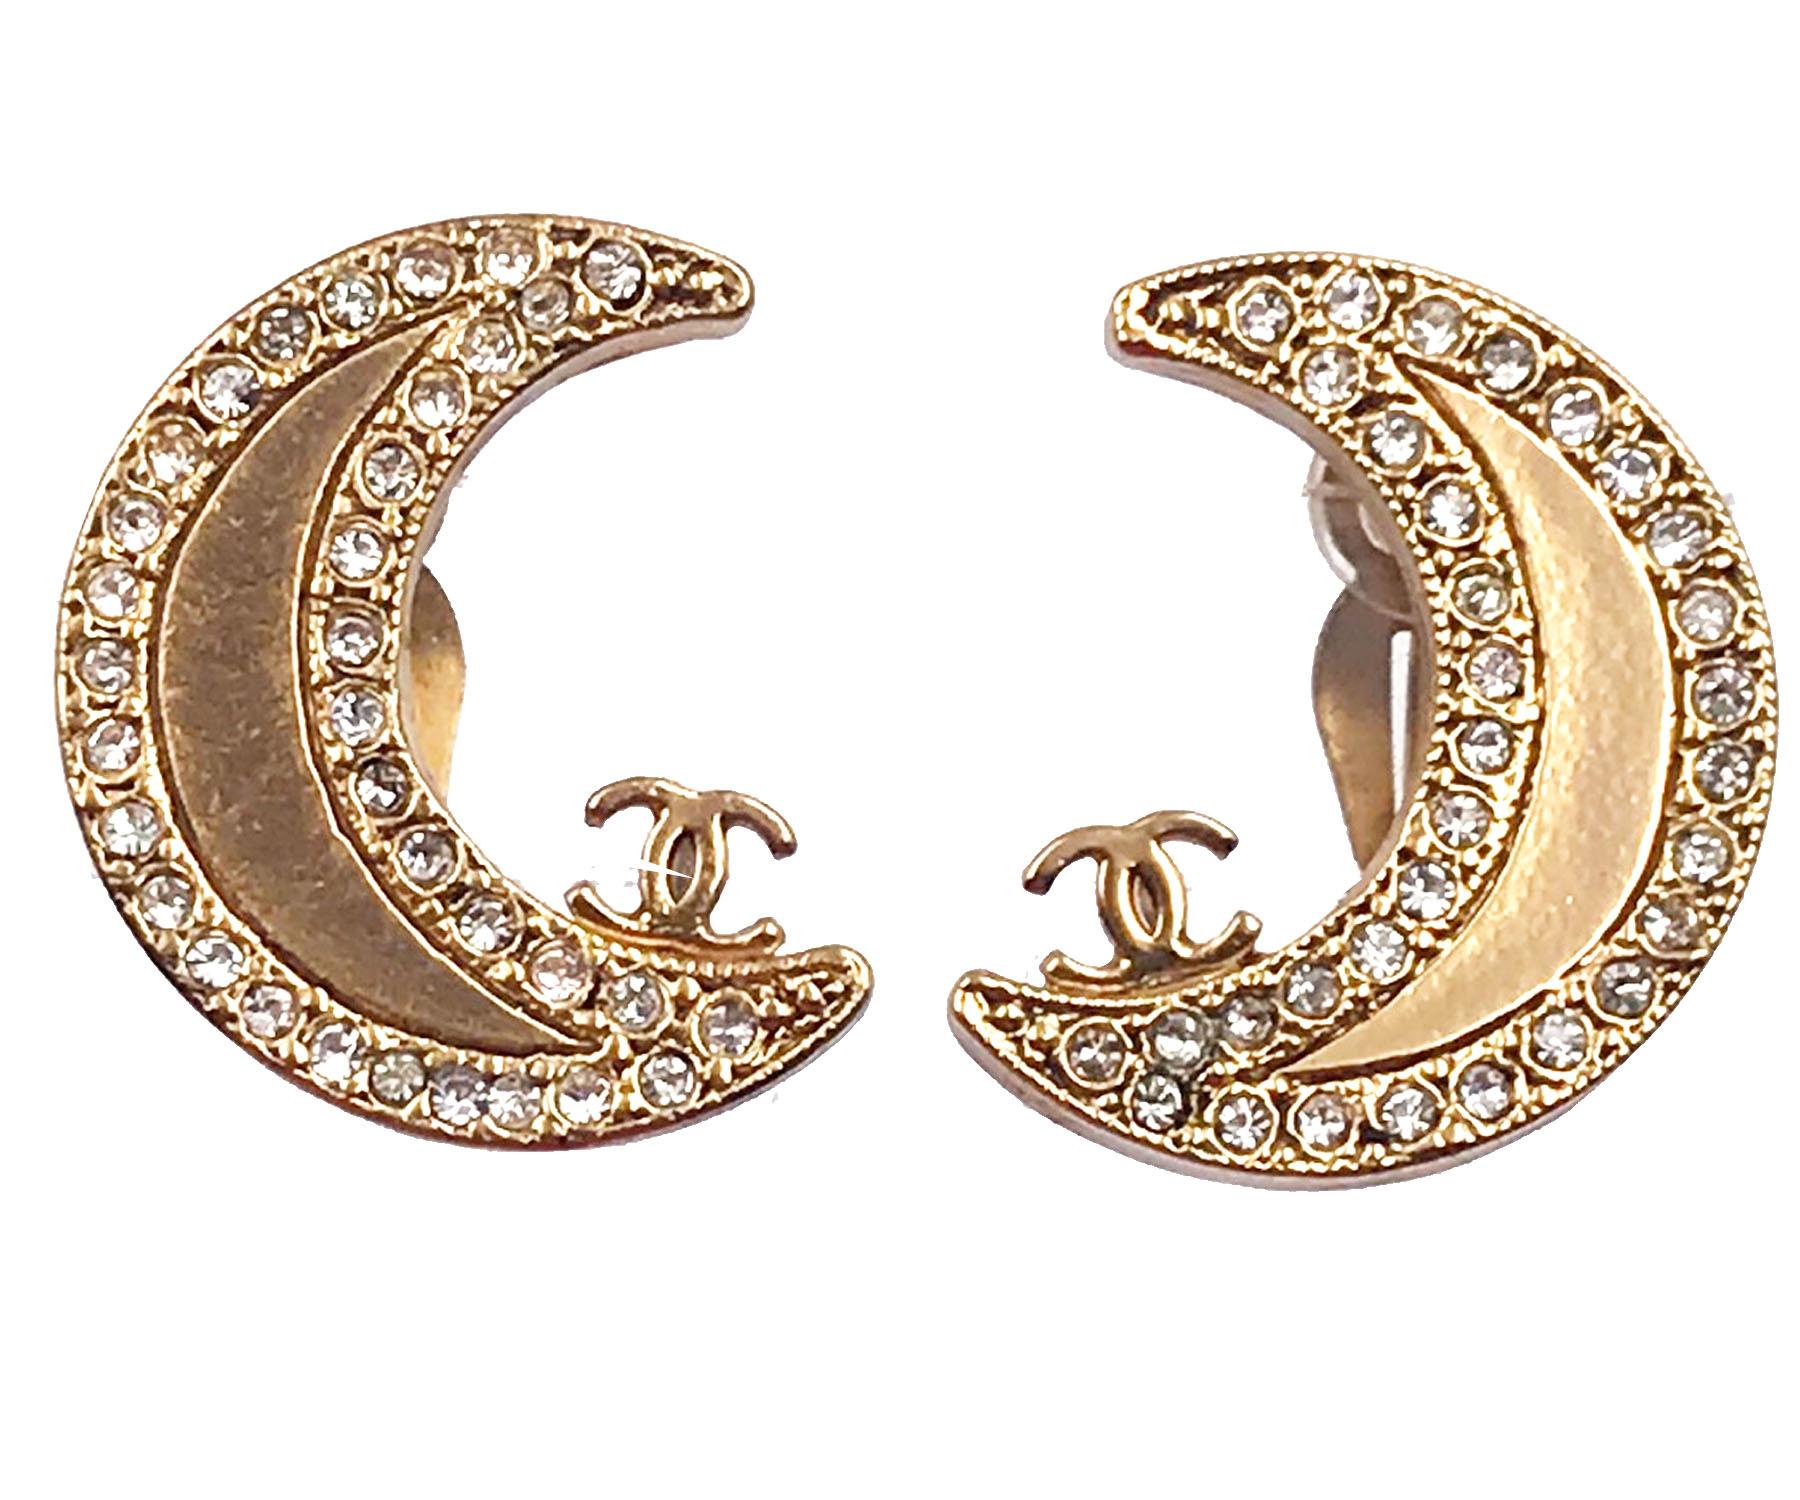 Chanel Rare Gold CC Moon Crystal Clip on Earrings

*Marked 01
*Made in France
*Comes with the original box

-It is approximately 0.9